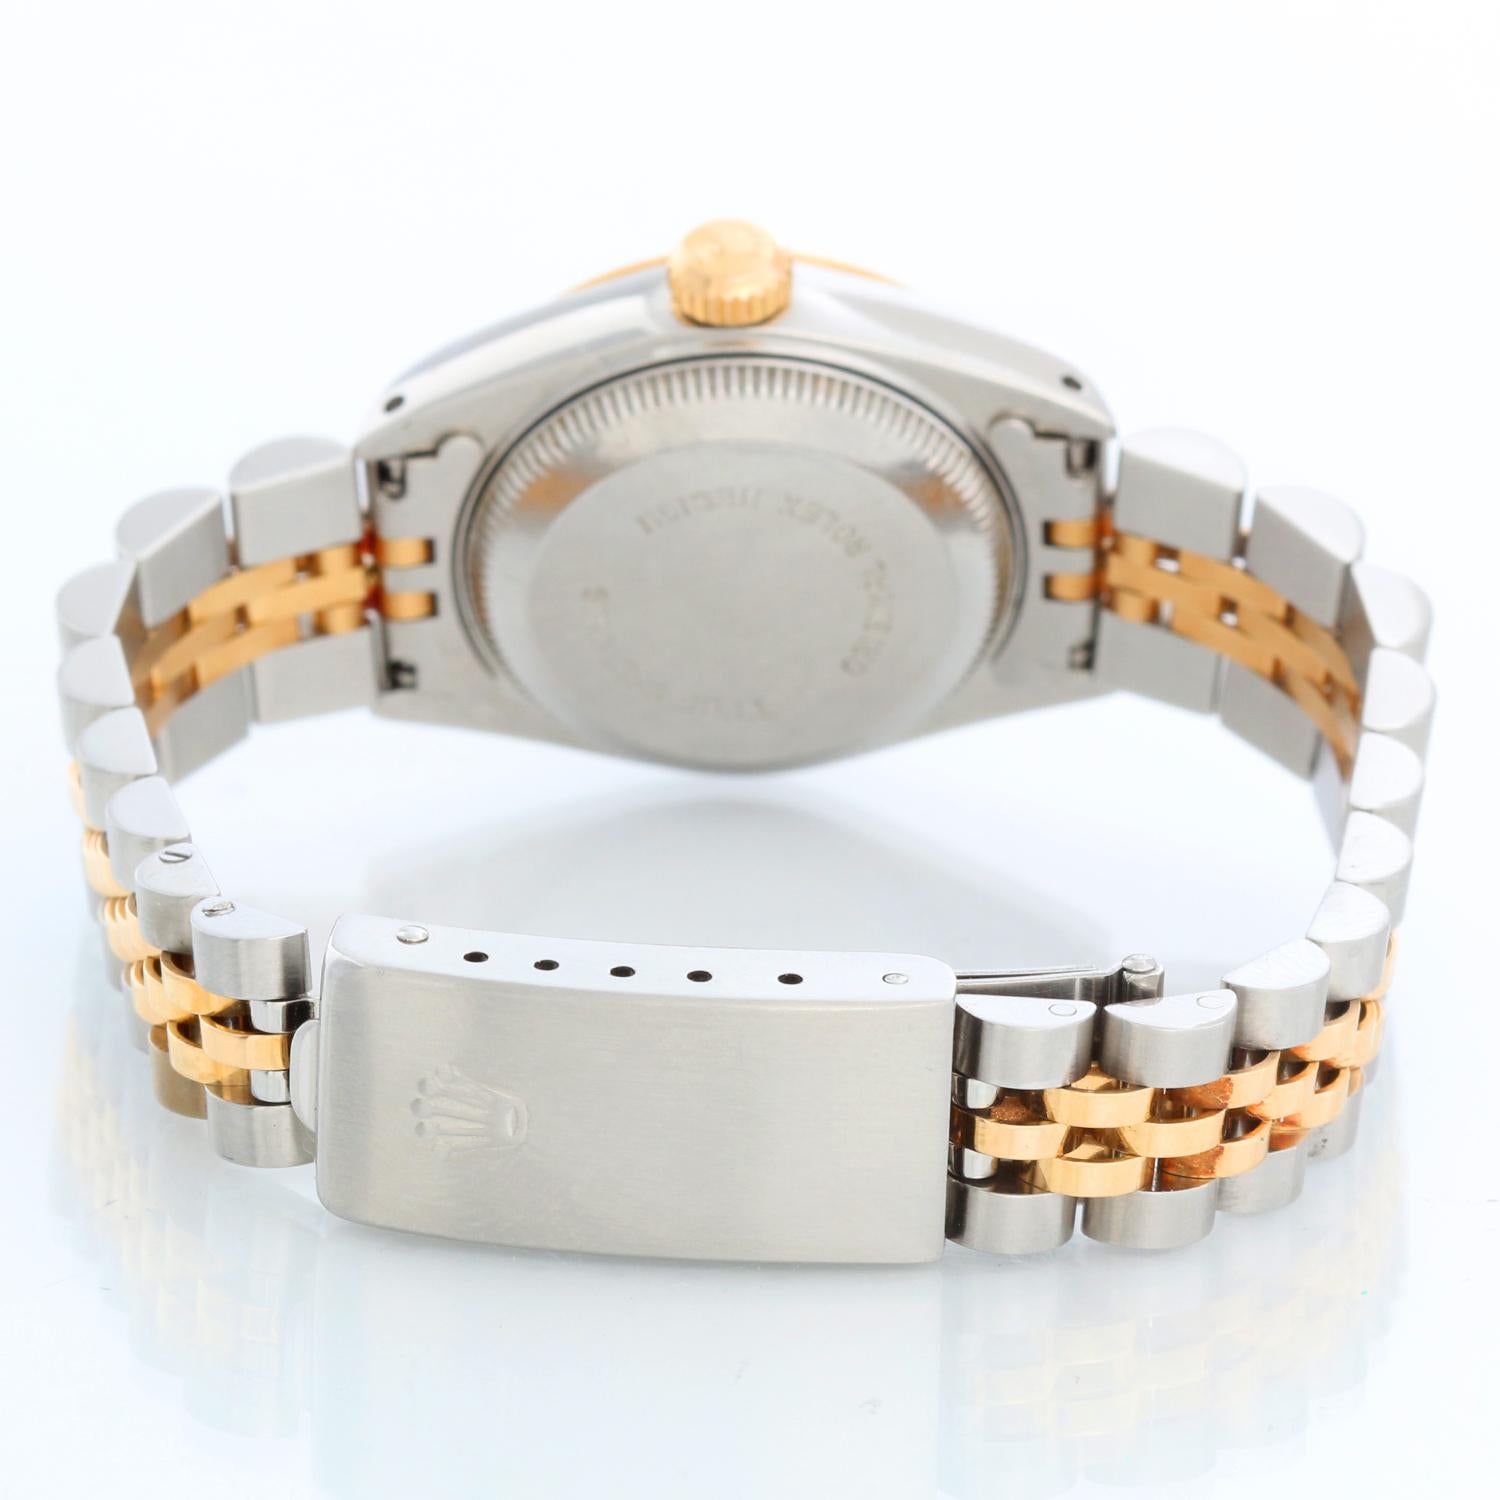 Rolex 2-Tone Datejust Steel & Gold Ladies Watch 69173 In Excellent Condition For Sale In Dallas, TX